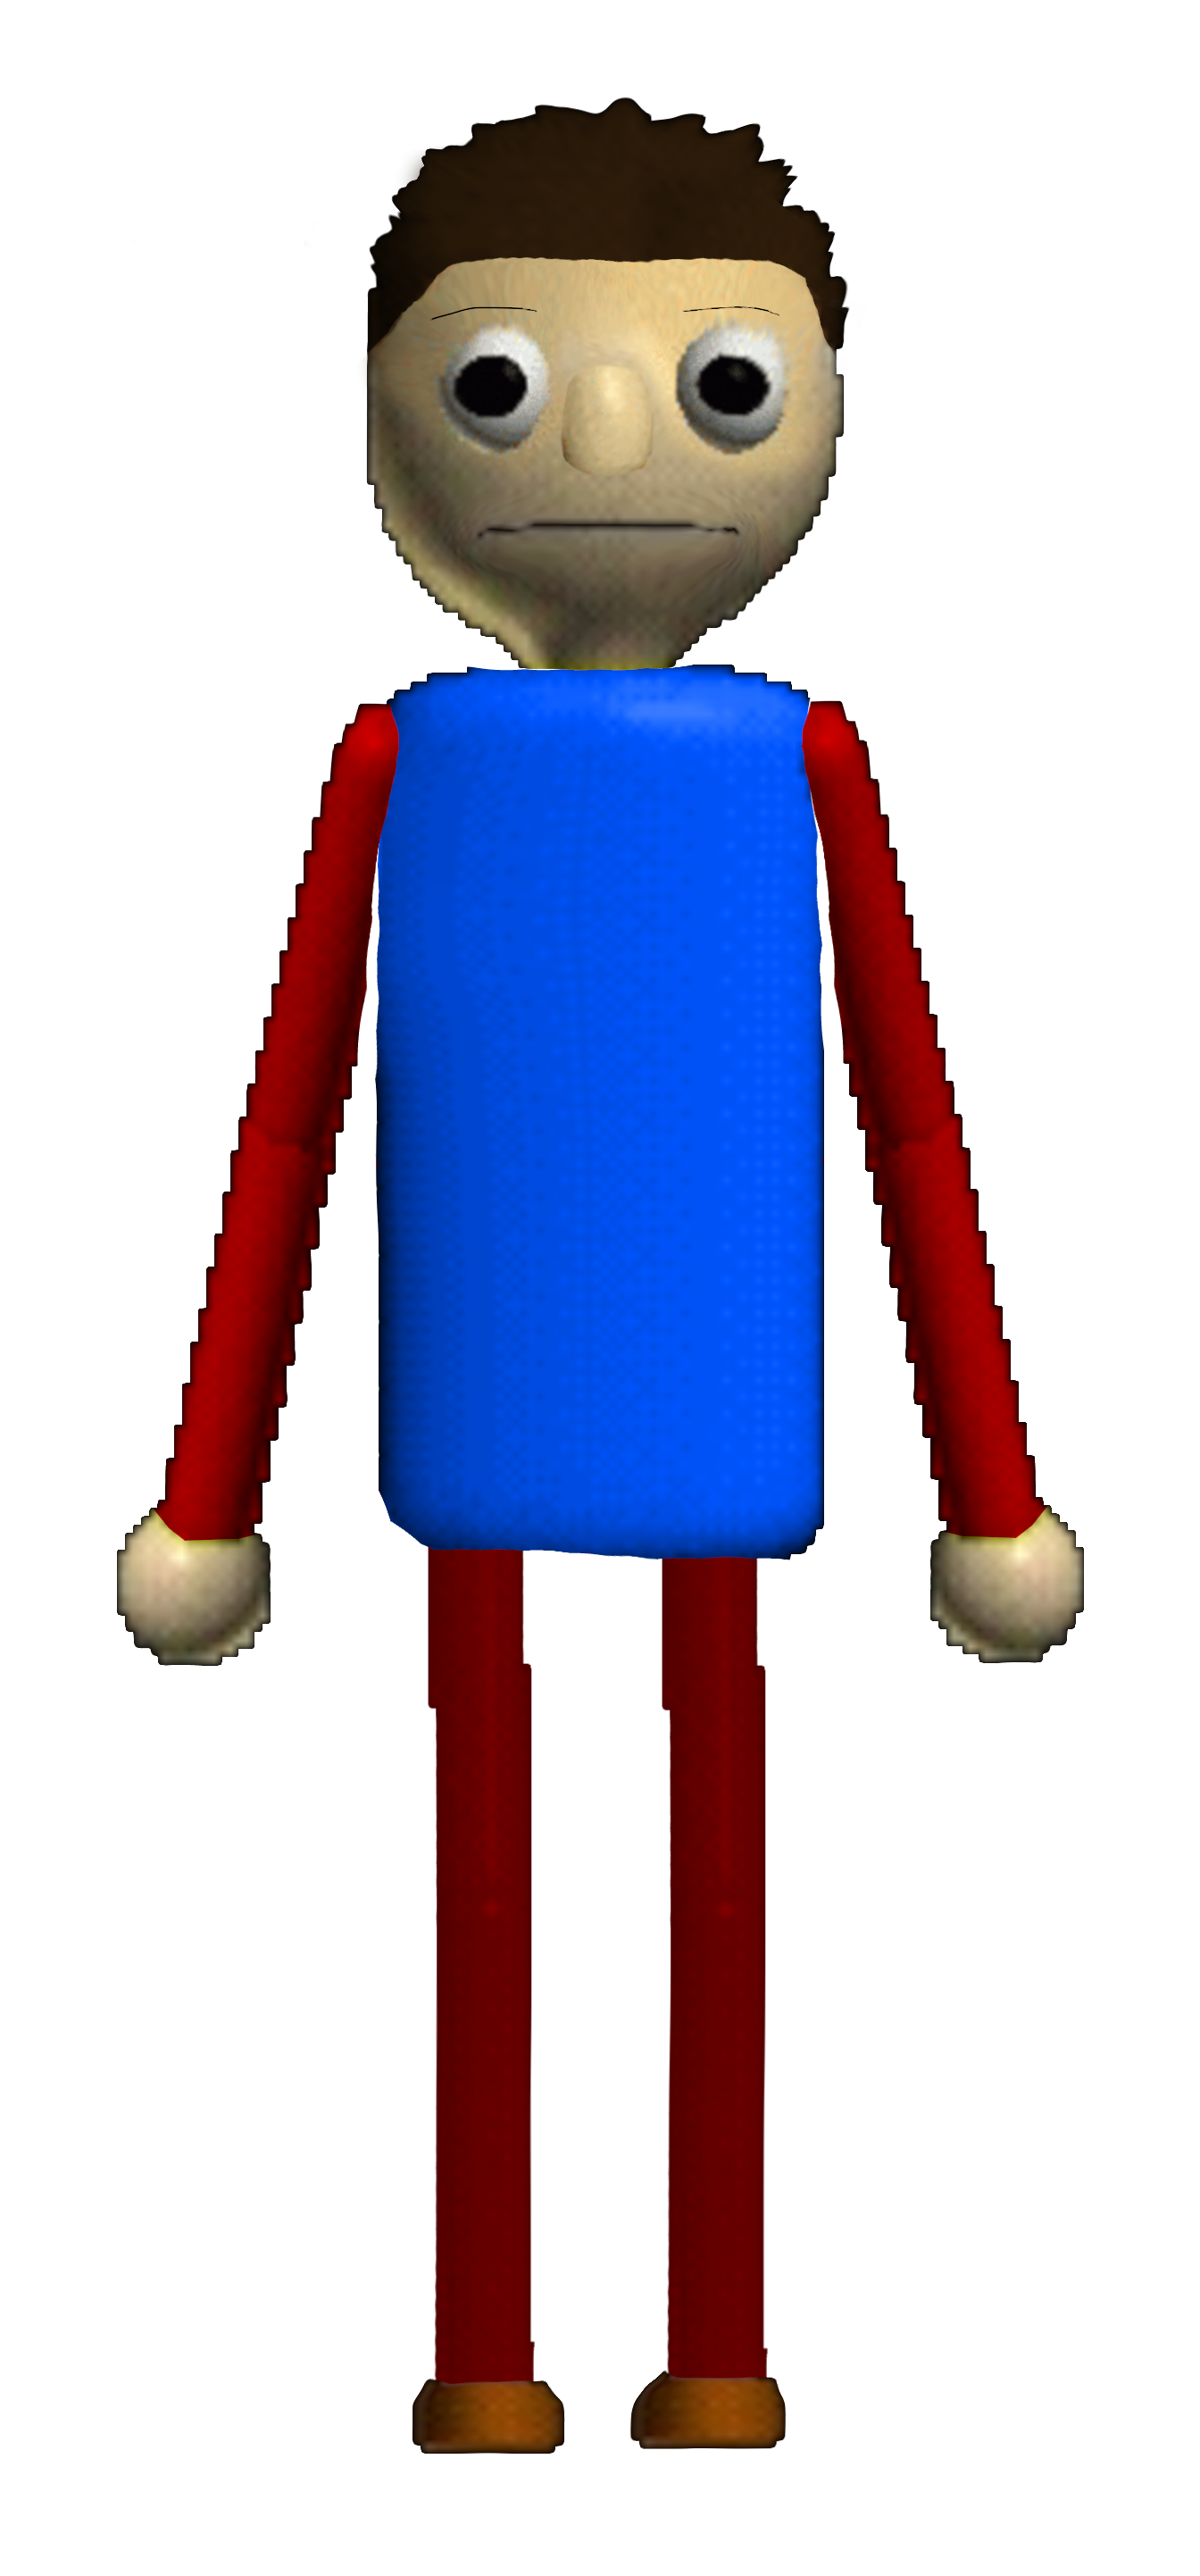 Omg the Real Baldi Basic Game on Xbox is released by Mystman12